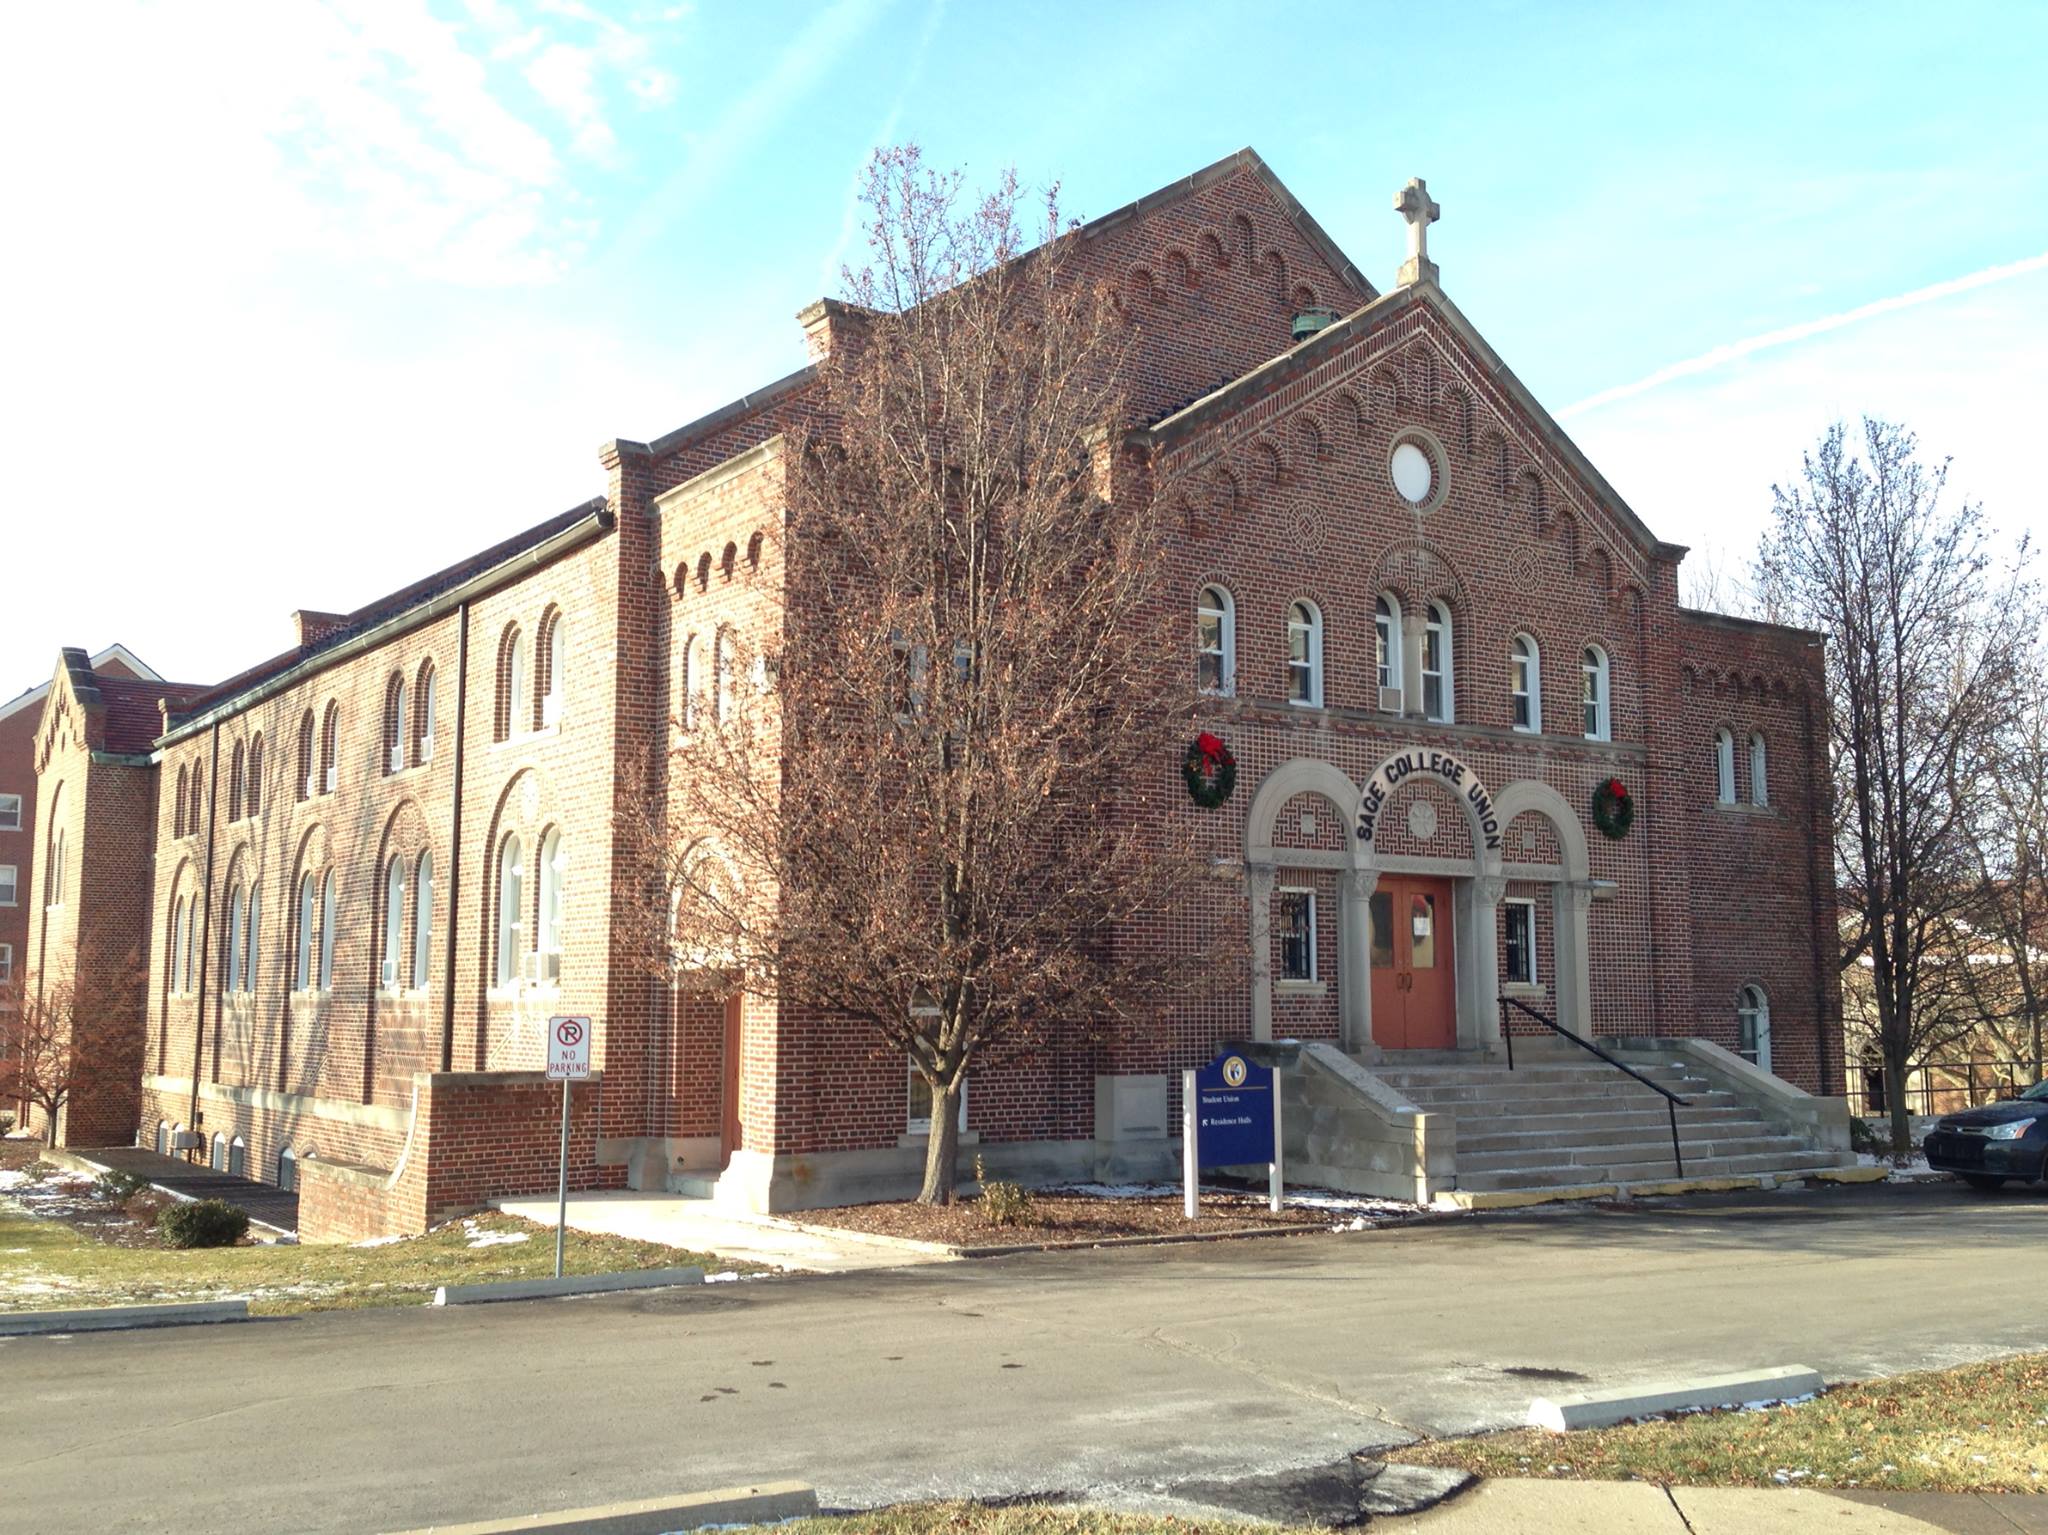 Sage Union, 1247 East Siena Heights Drive, 1924 (torn down June 2018)